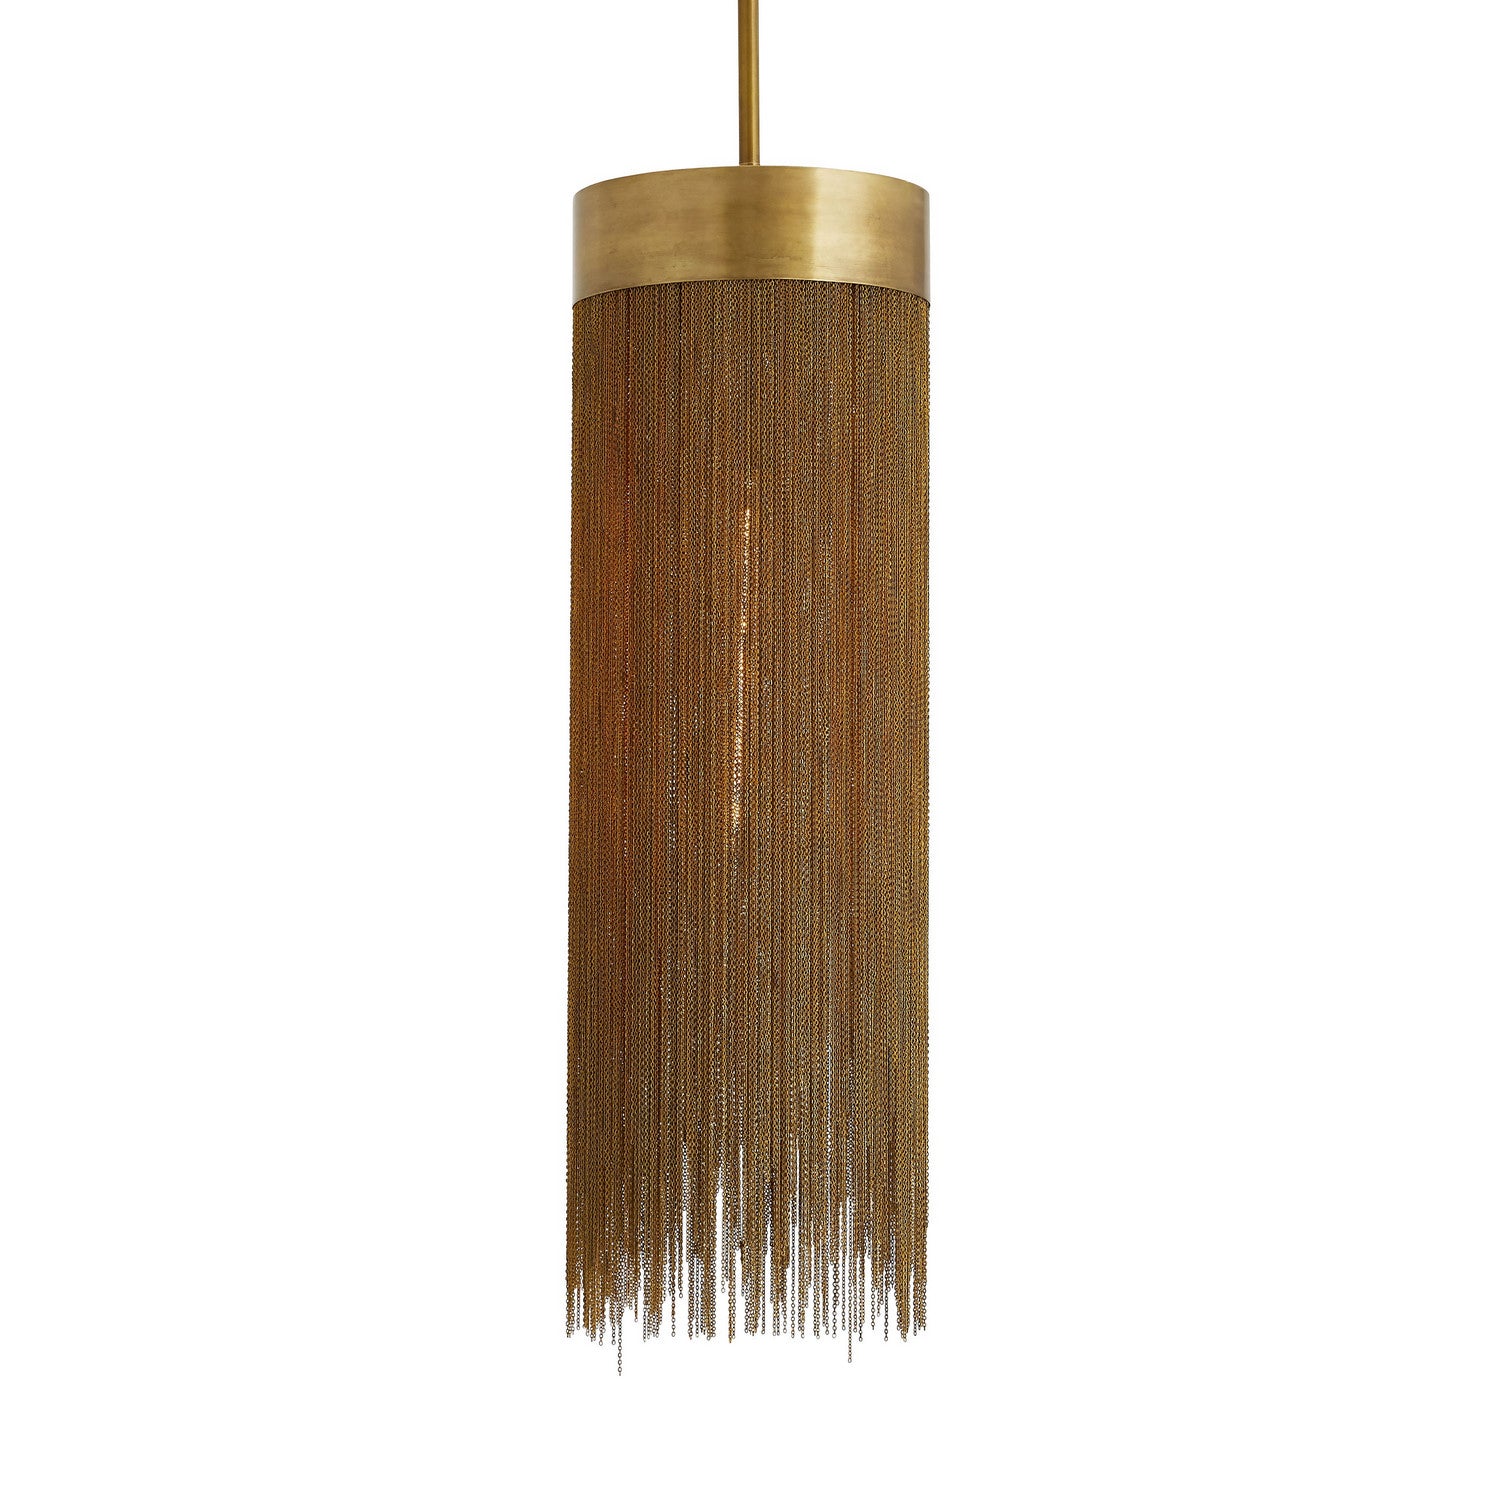 One Light Pendant from the Fatima collection in Antique Brass finish